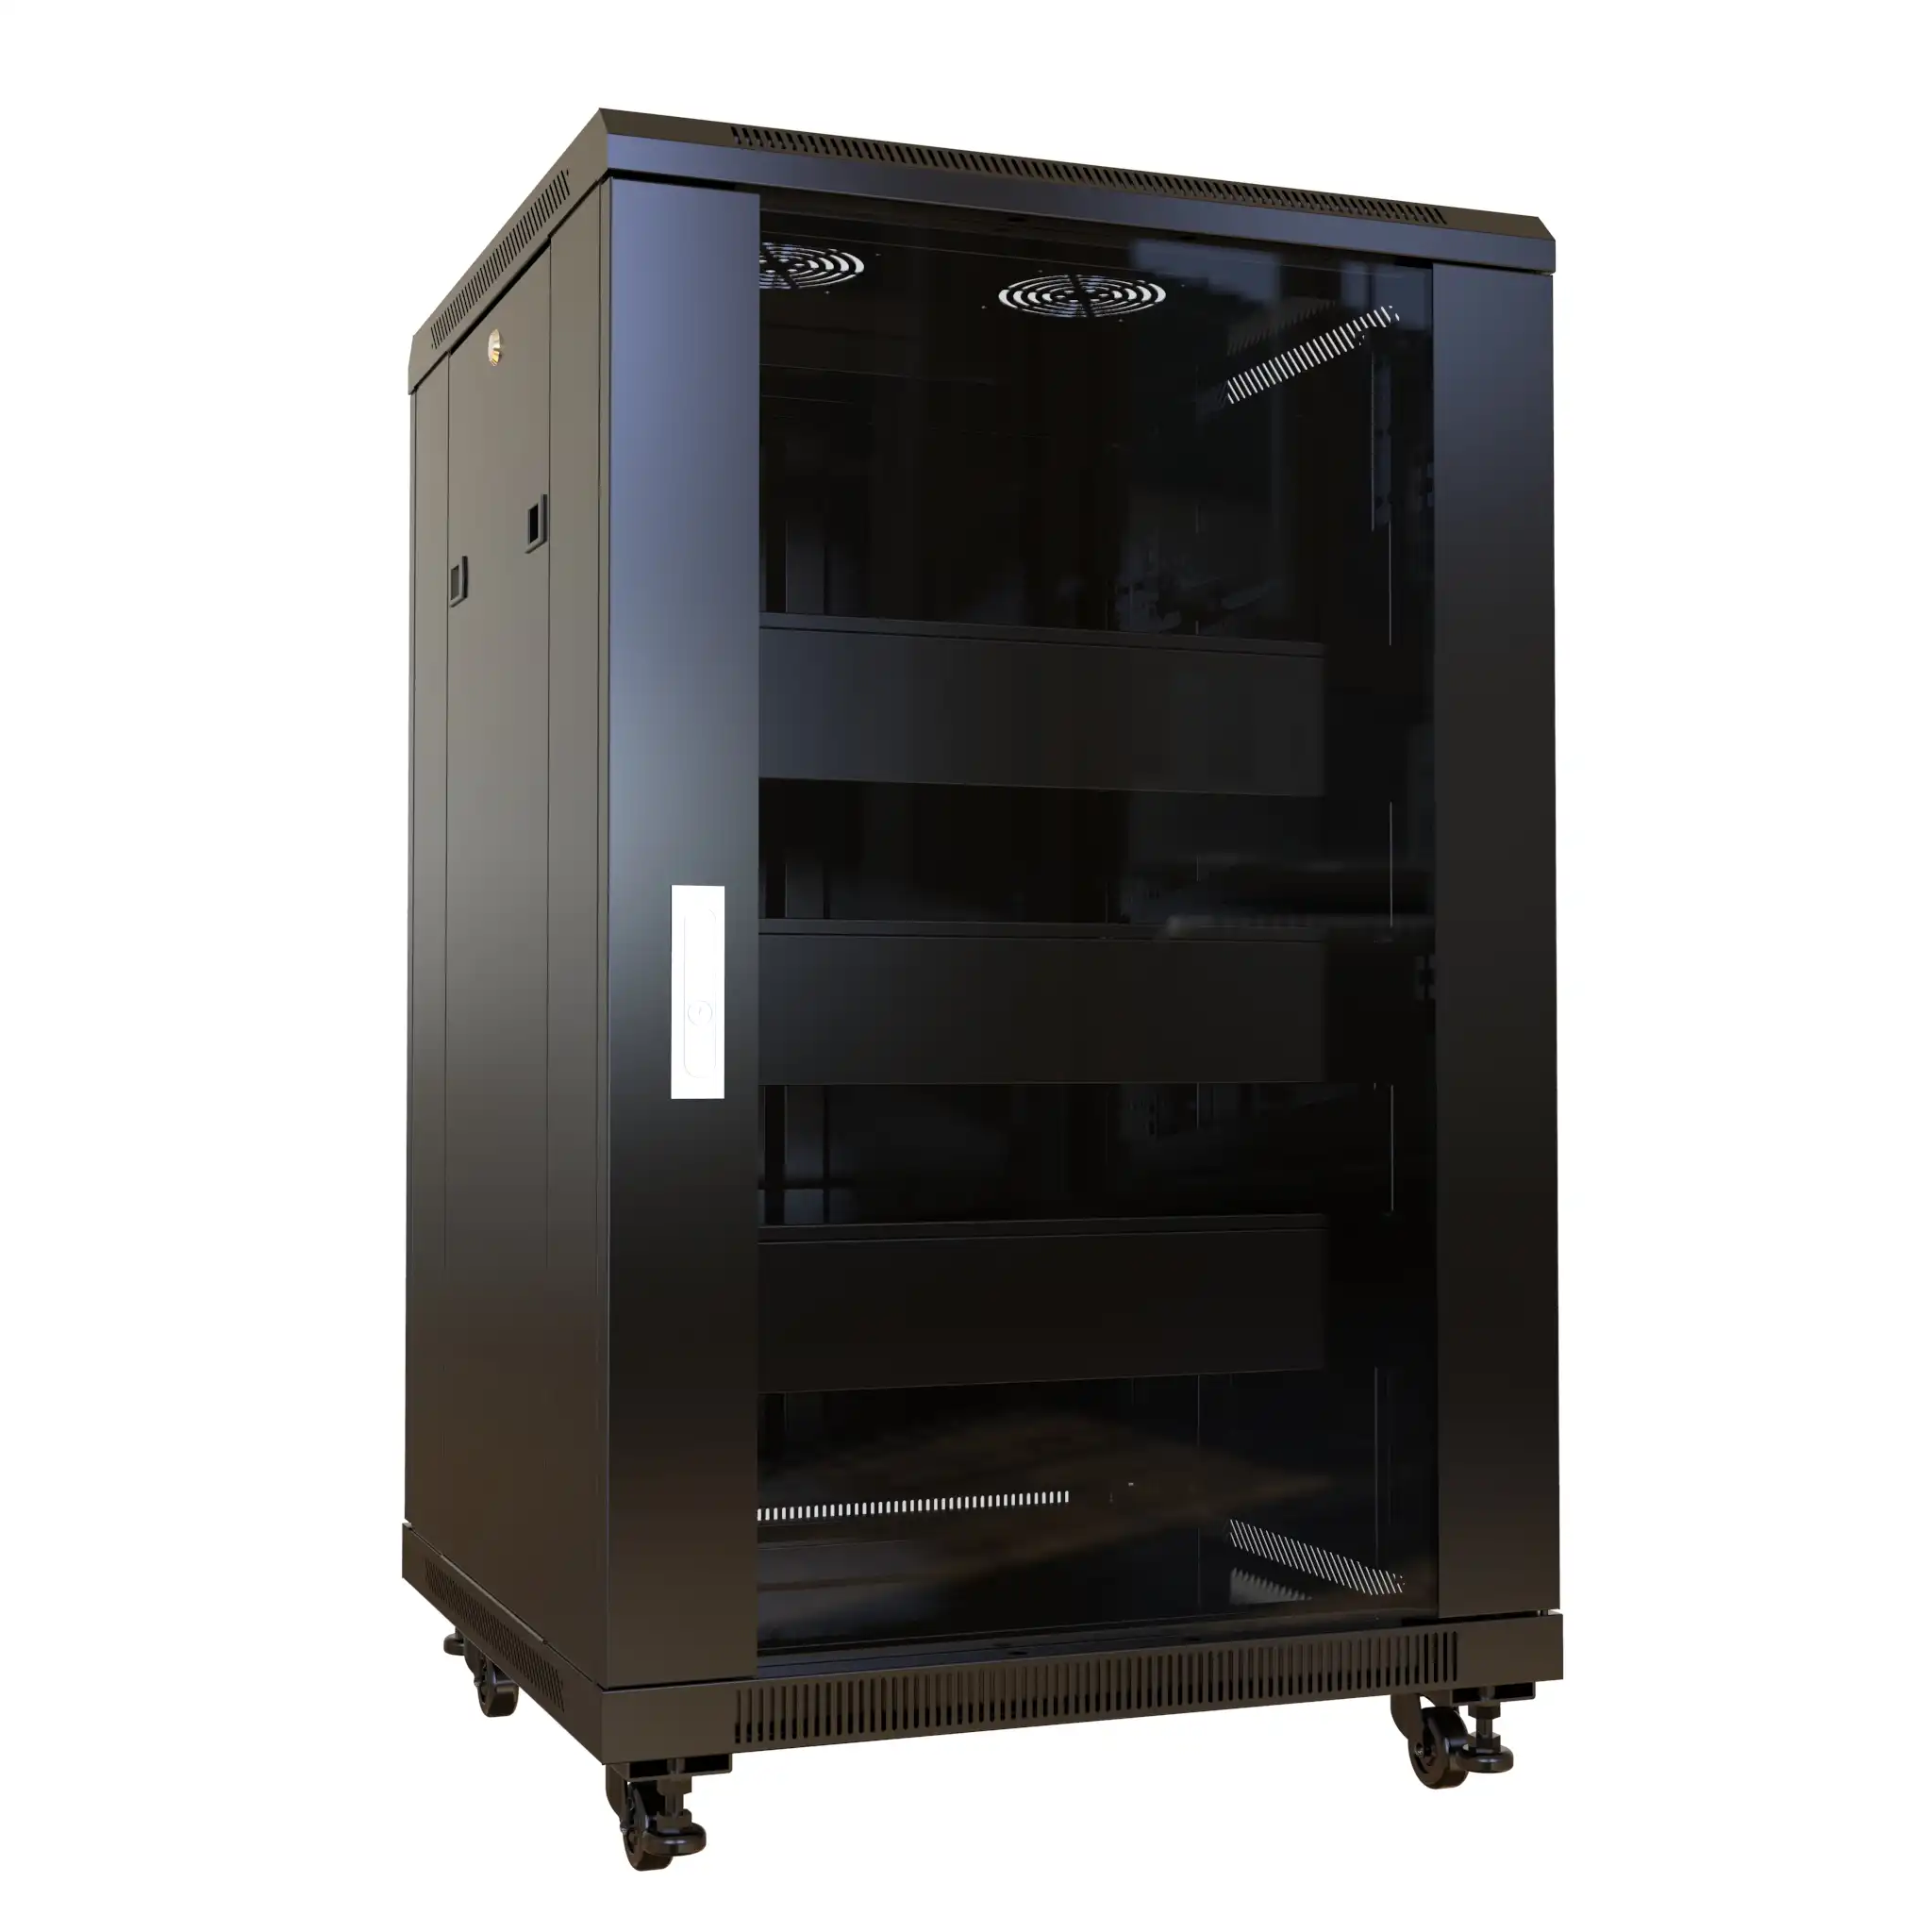 RB-AV Series - Hammond Manufacturing Rack Solutions at KGA Enclosures Ltd - Click for a larger image